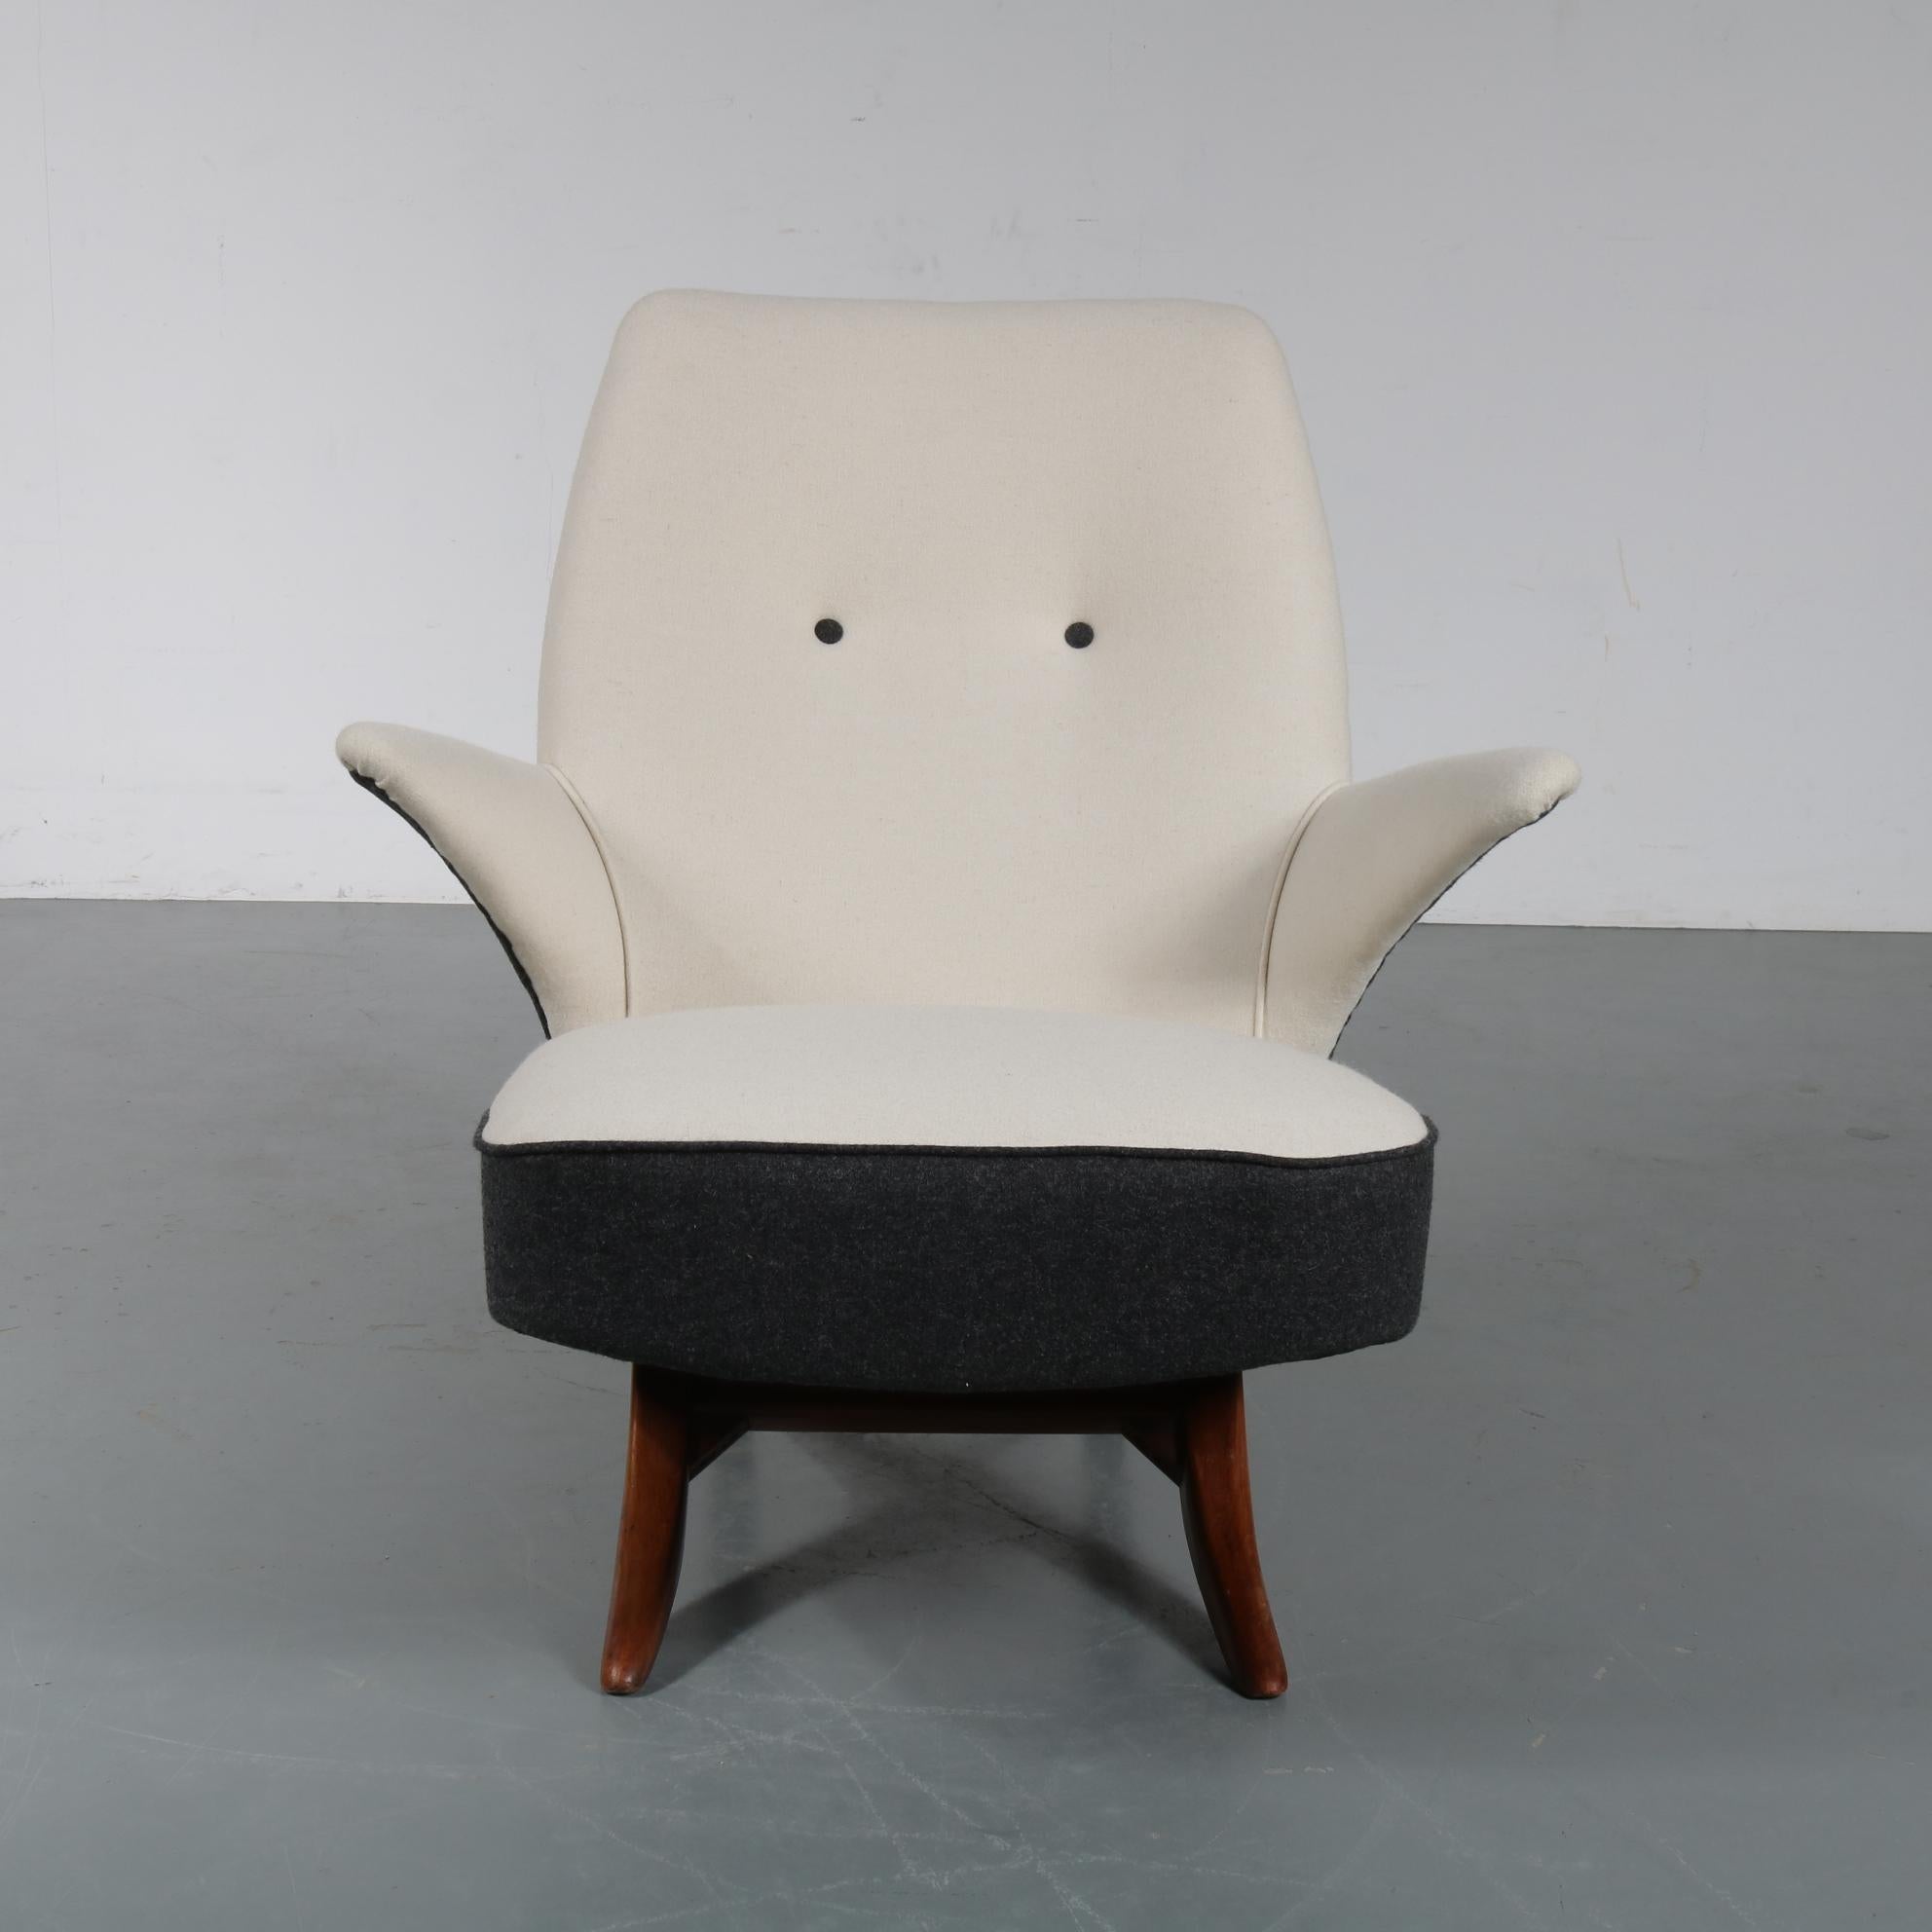 Beautifull Penguin chair by Theo Ruth for Artifort, manufactured in the Netherlands in 1957.

This iconic chair is upholstered in anthracite and white Keymer Viborg fabric, the perfect colors to show how the chair got it's name. The seating and